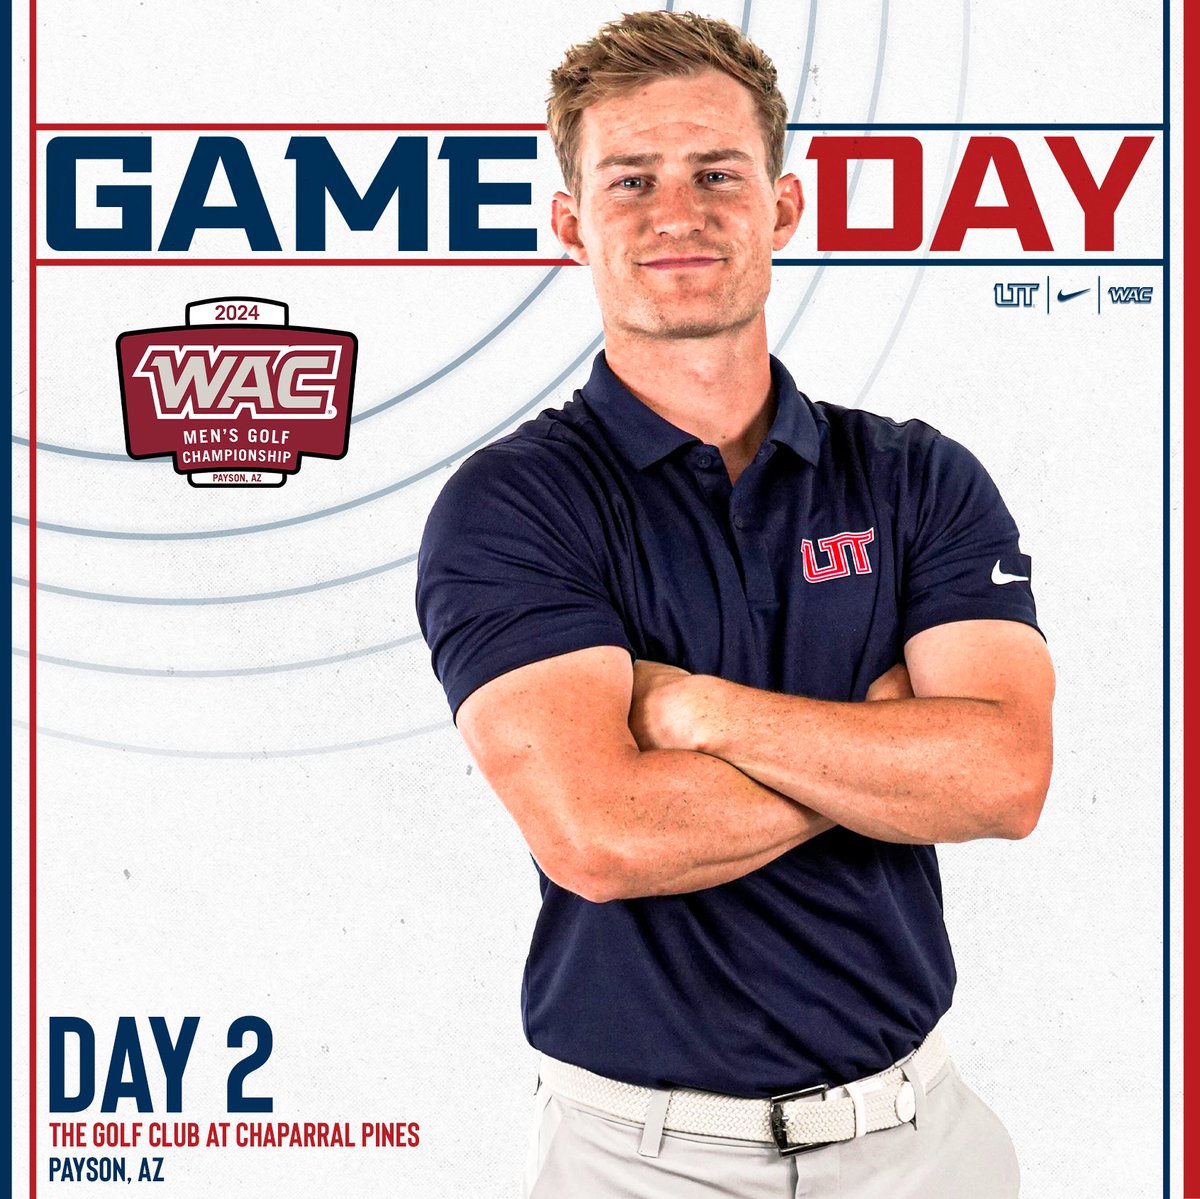 GAME DAY!!! 🏌️‍♀️- 2024 WAC Men's Golf Championships (Second Round) ⛳️- The Golf Club at Chaparral Pines; Payson, Ariz. 📊 - shorturl.at/prJQ6 #UtahTechBlazers | #WACmgolf